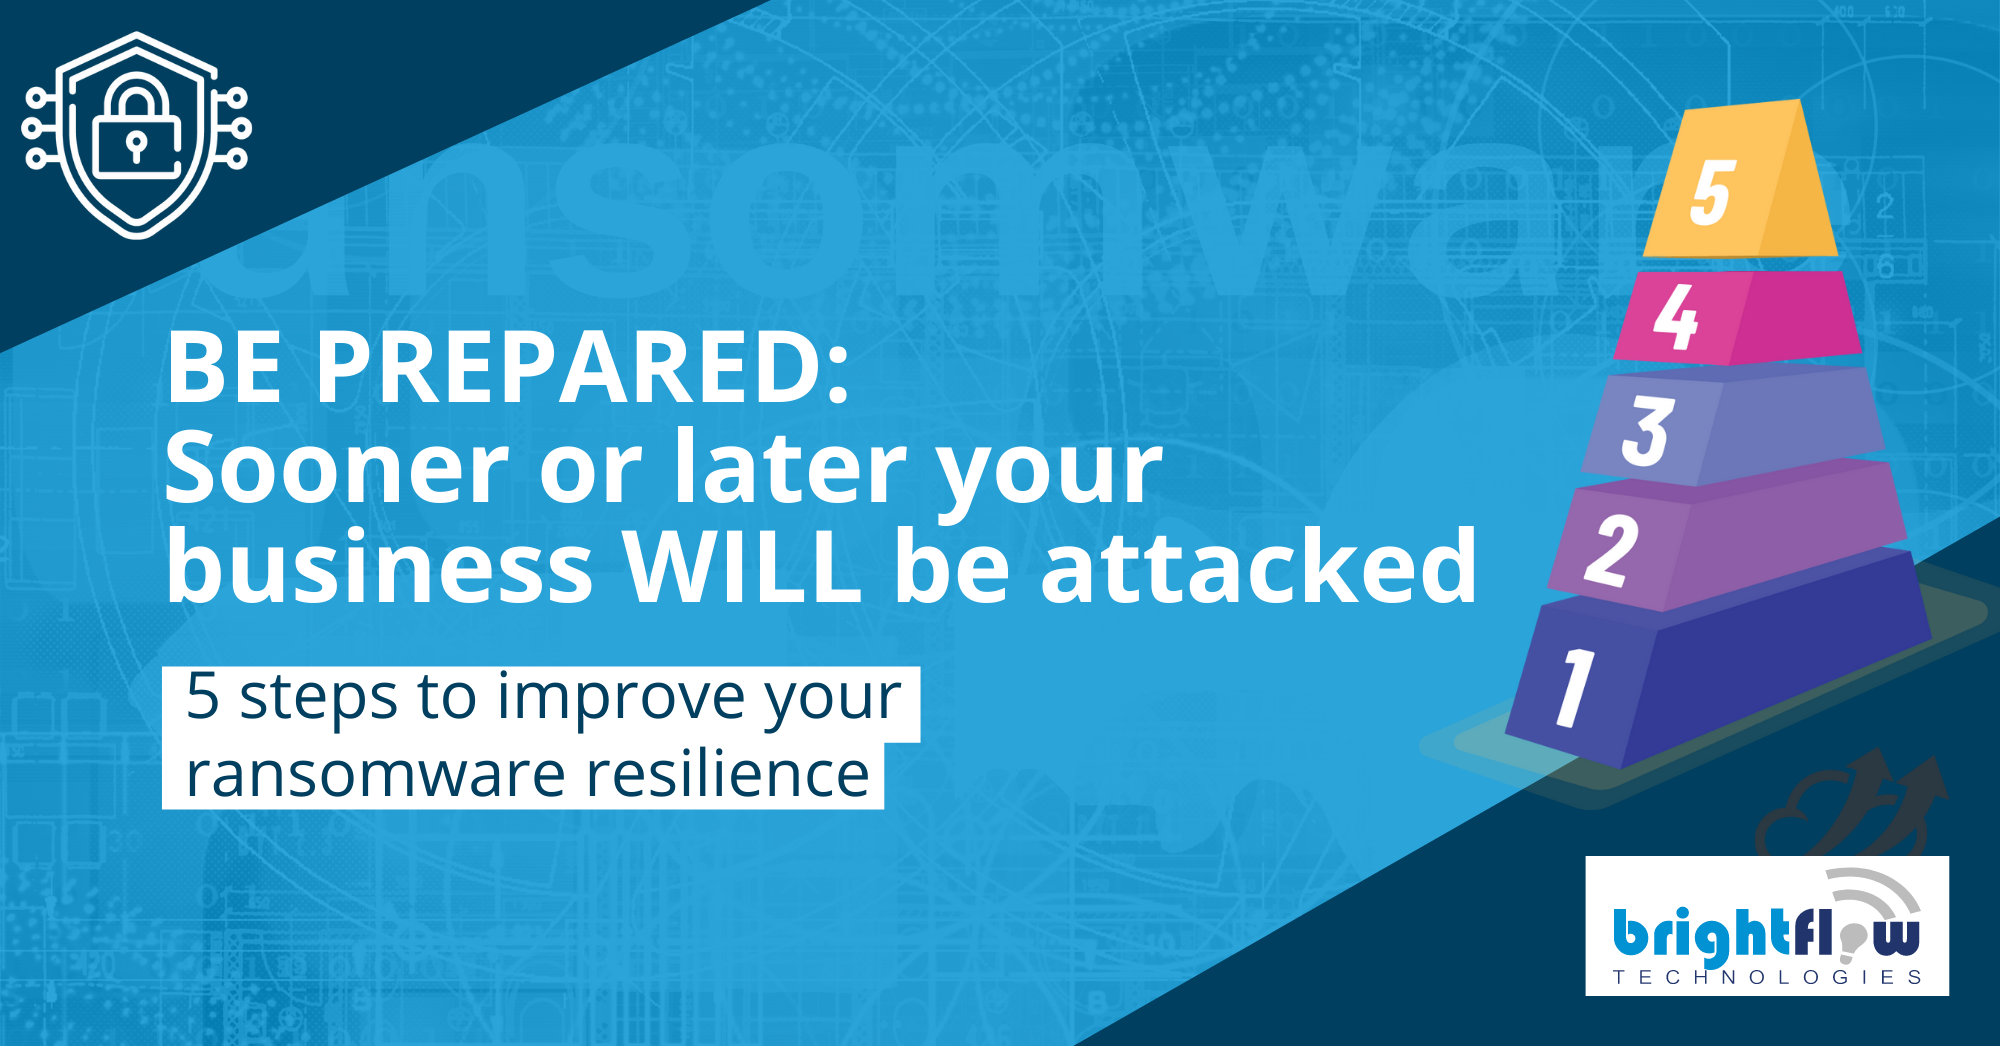 5 Steps to Improve Your Ransomware Resilience